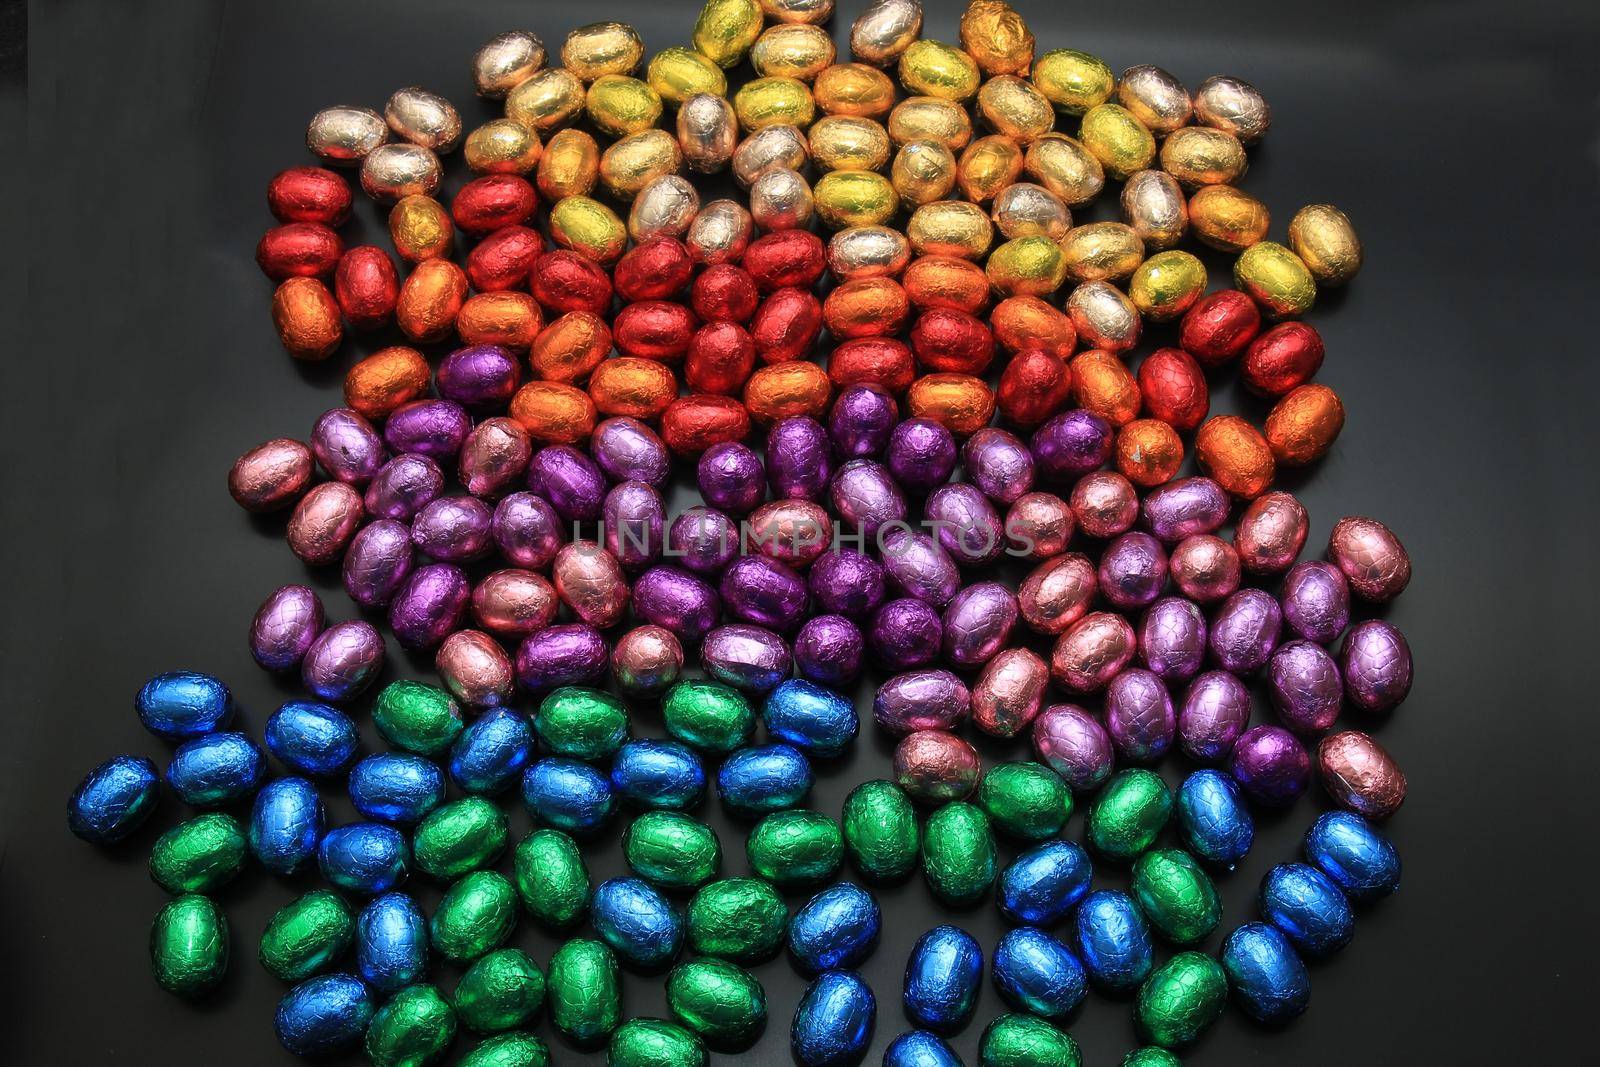 group of foil wrapped chocolate easter eggs in rainbow colors by studioportosabbia